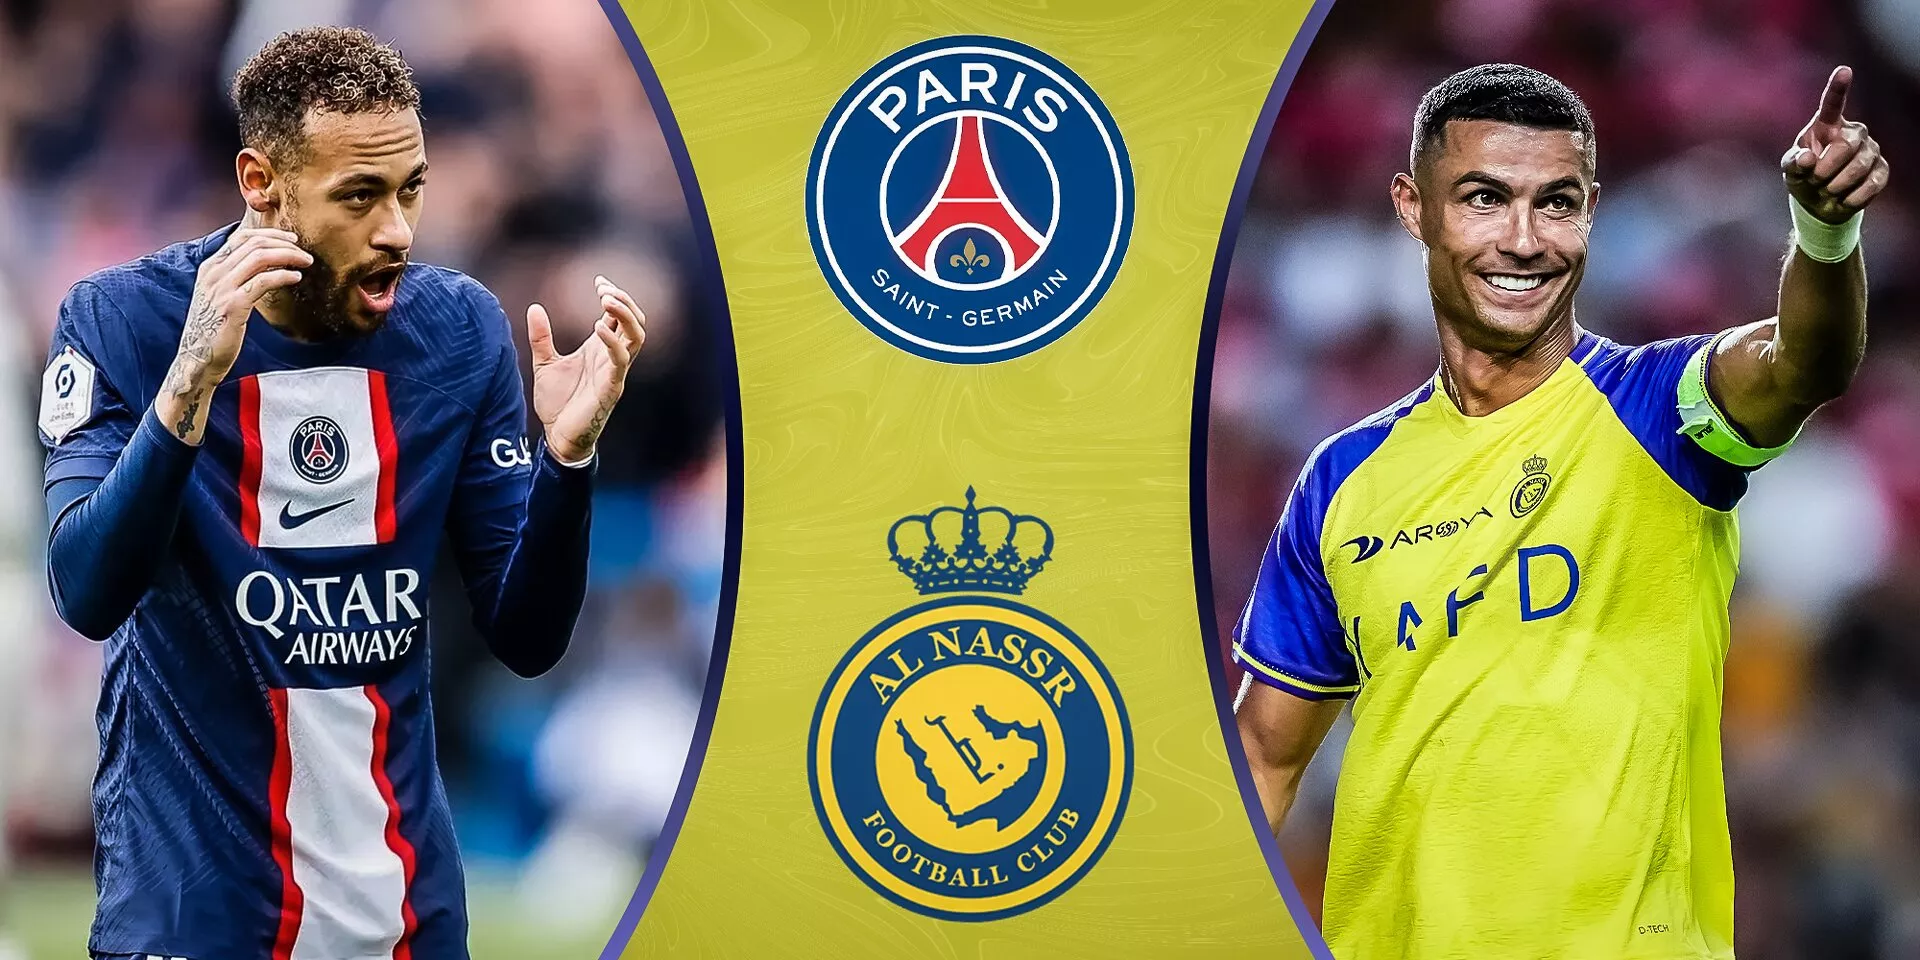 Where and how to watch PSG vs Al-Nassr friendly match?